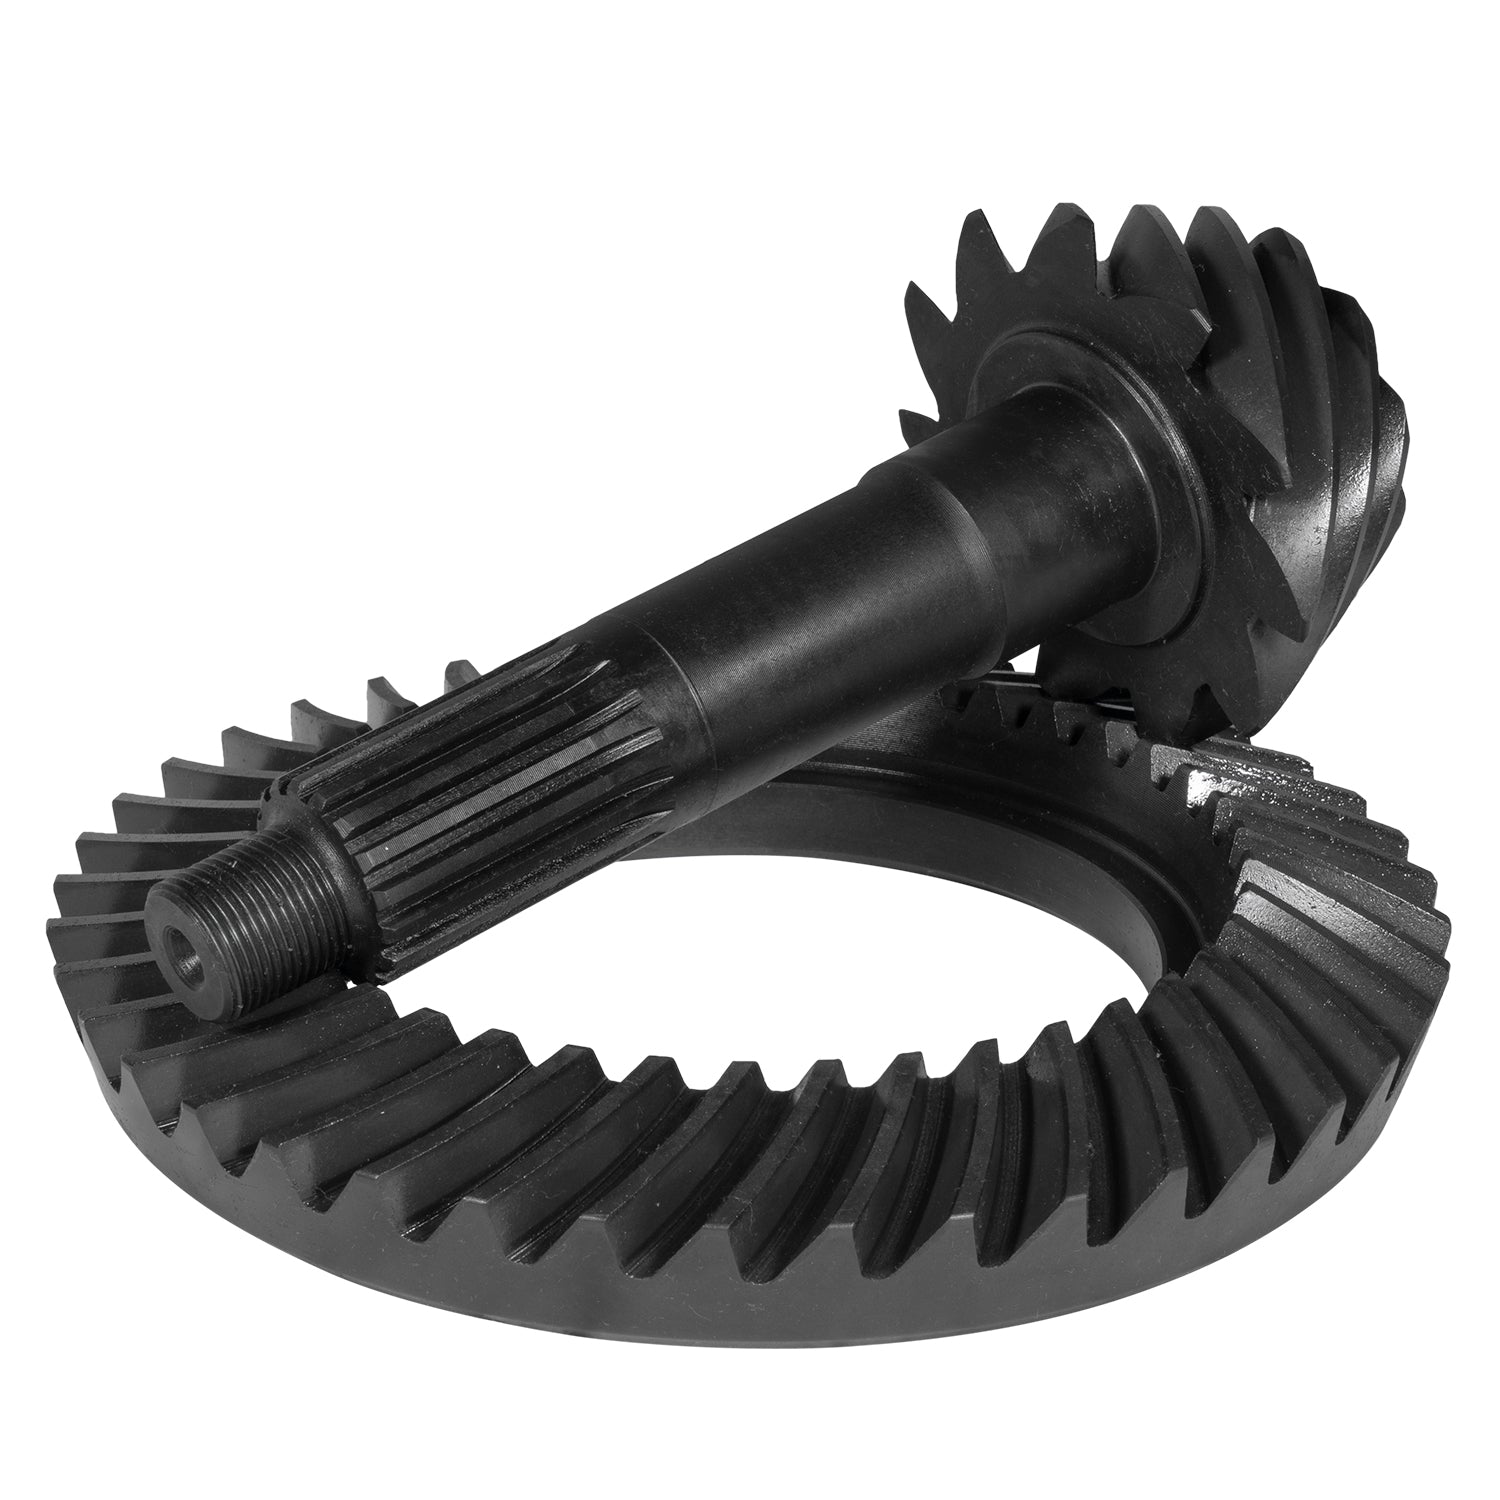 Yukon Gear Chevrolet Differential Ring and Pinion Kit - Rear YGK2369